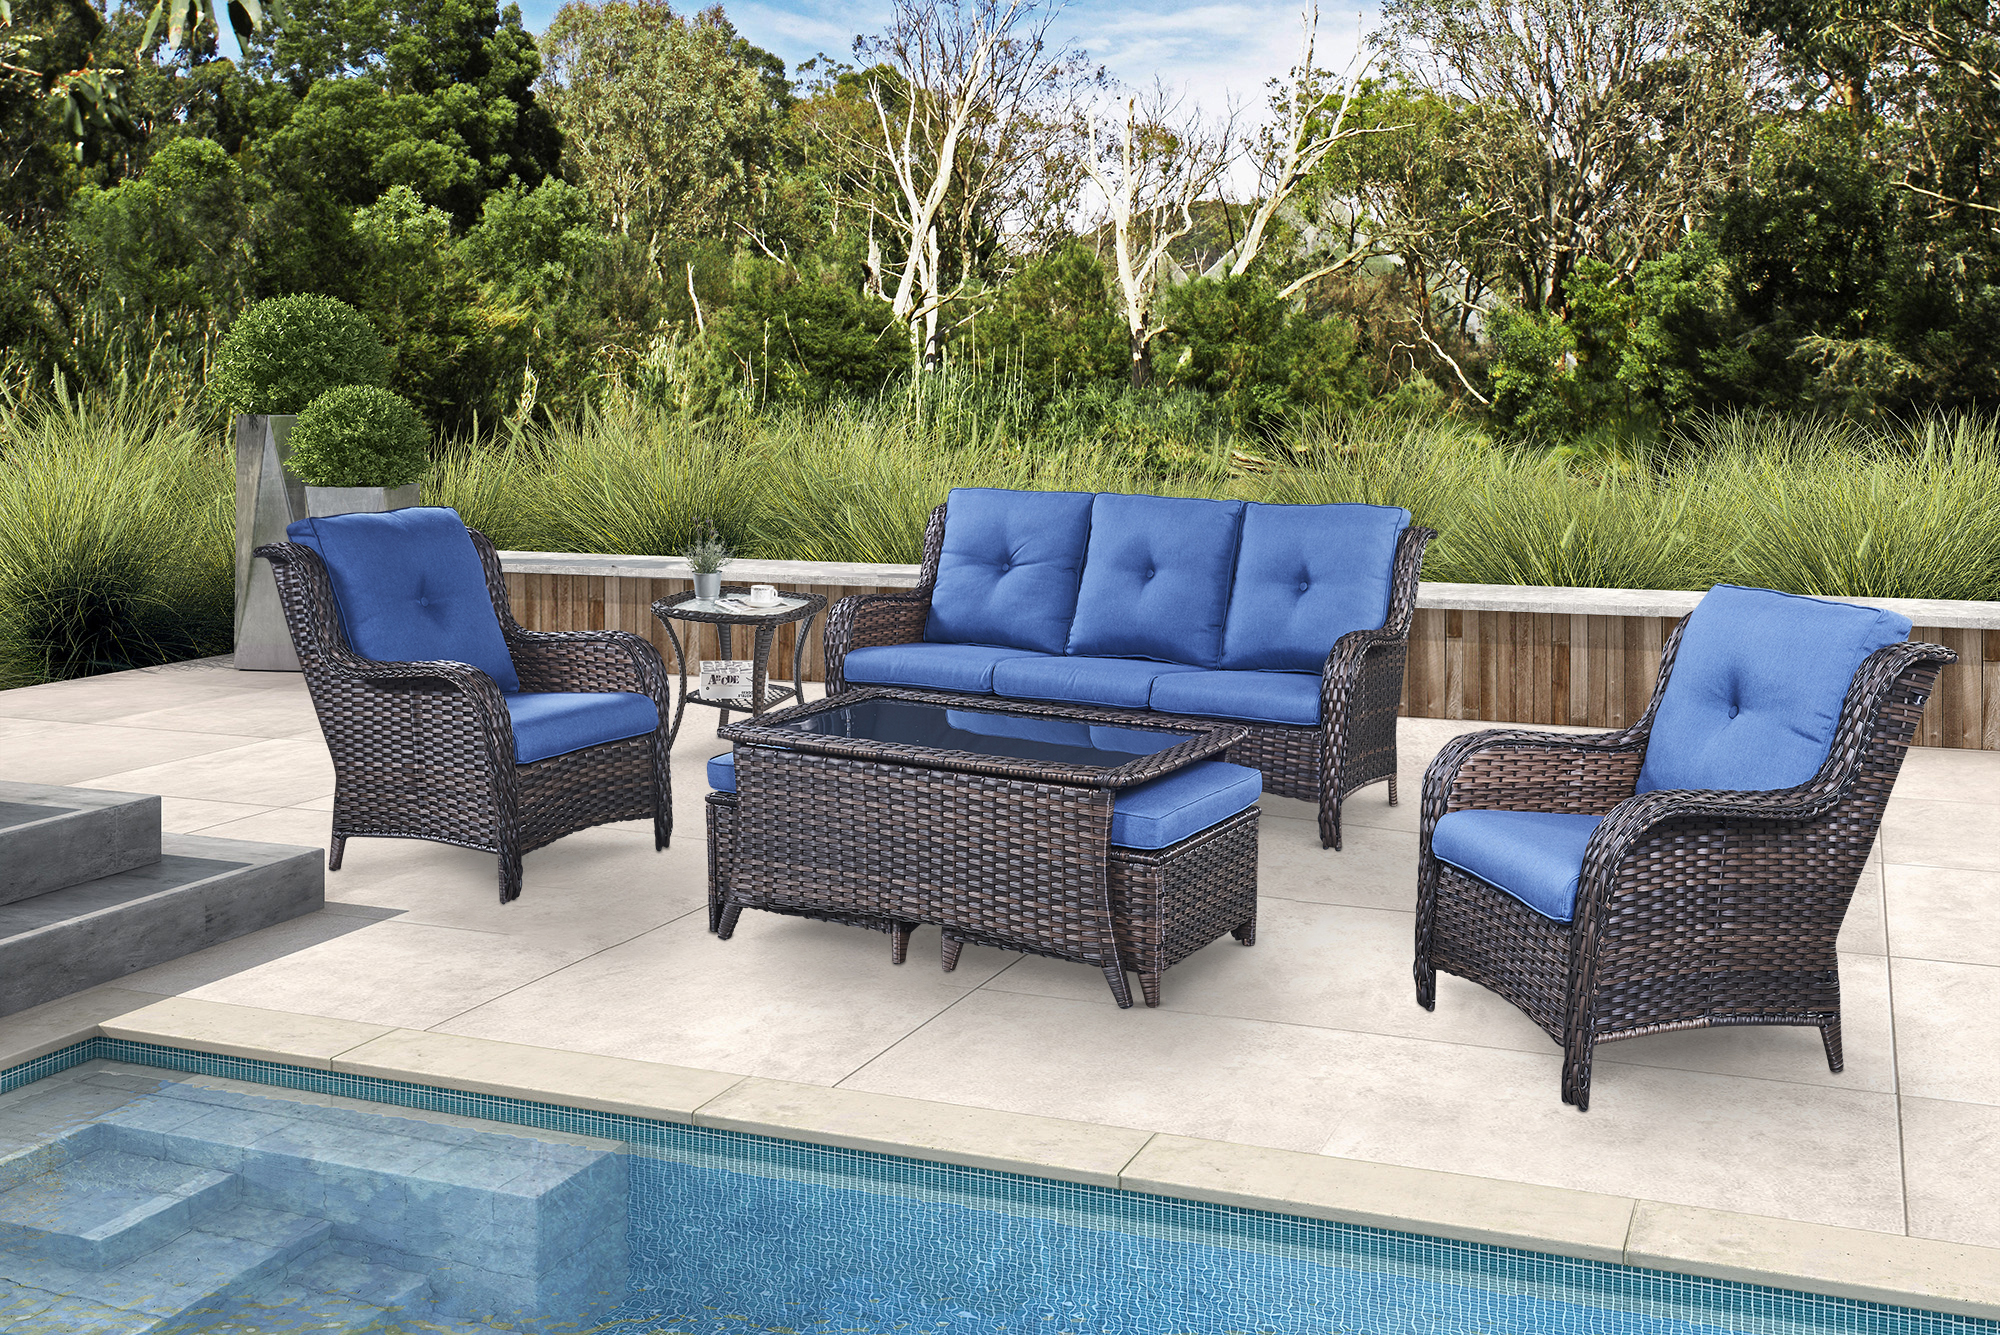 PARKWELL 7Pcs Outdoor Wicker Rattan Conversation Patio Furniture Set, including Three-seater Sofa, Chairs, Coffee Table, Ottomans and Side Table with Cushion, Blue - image 1 of 9